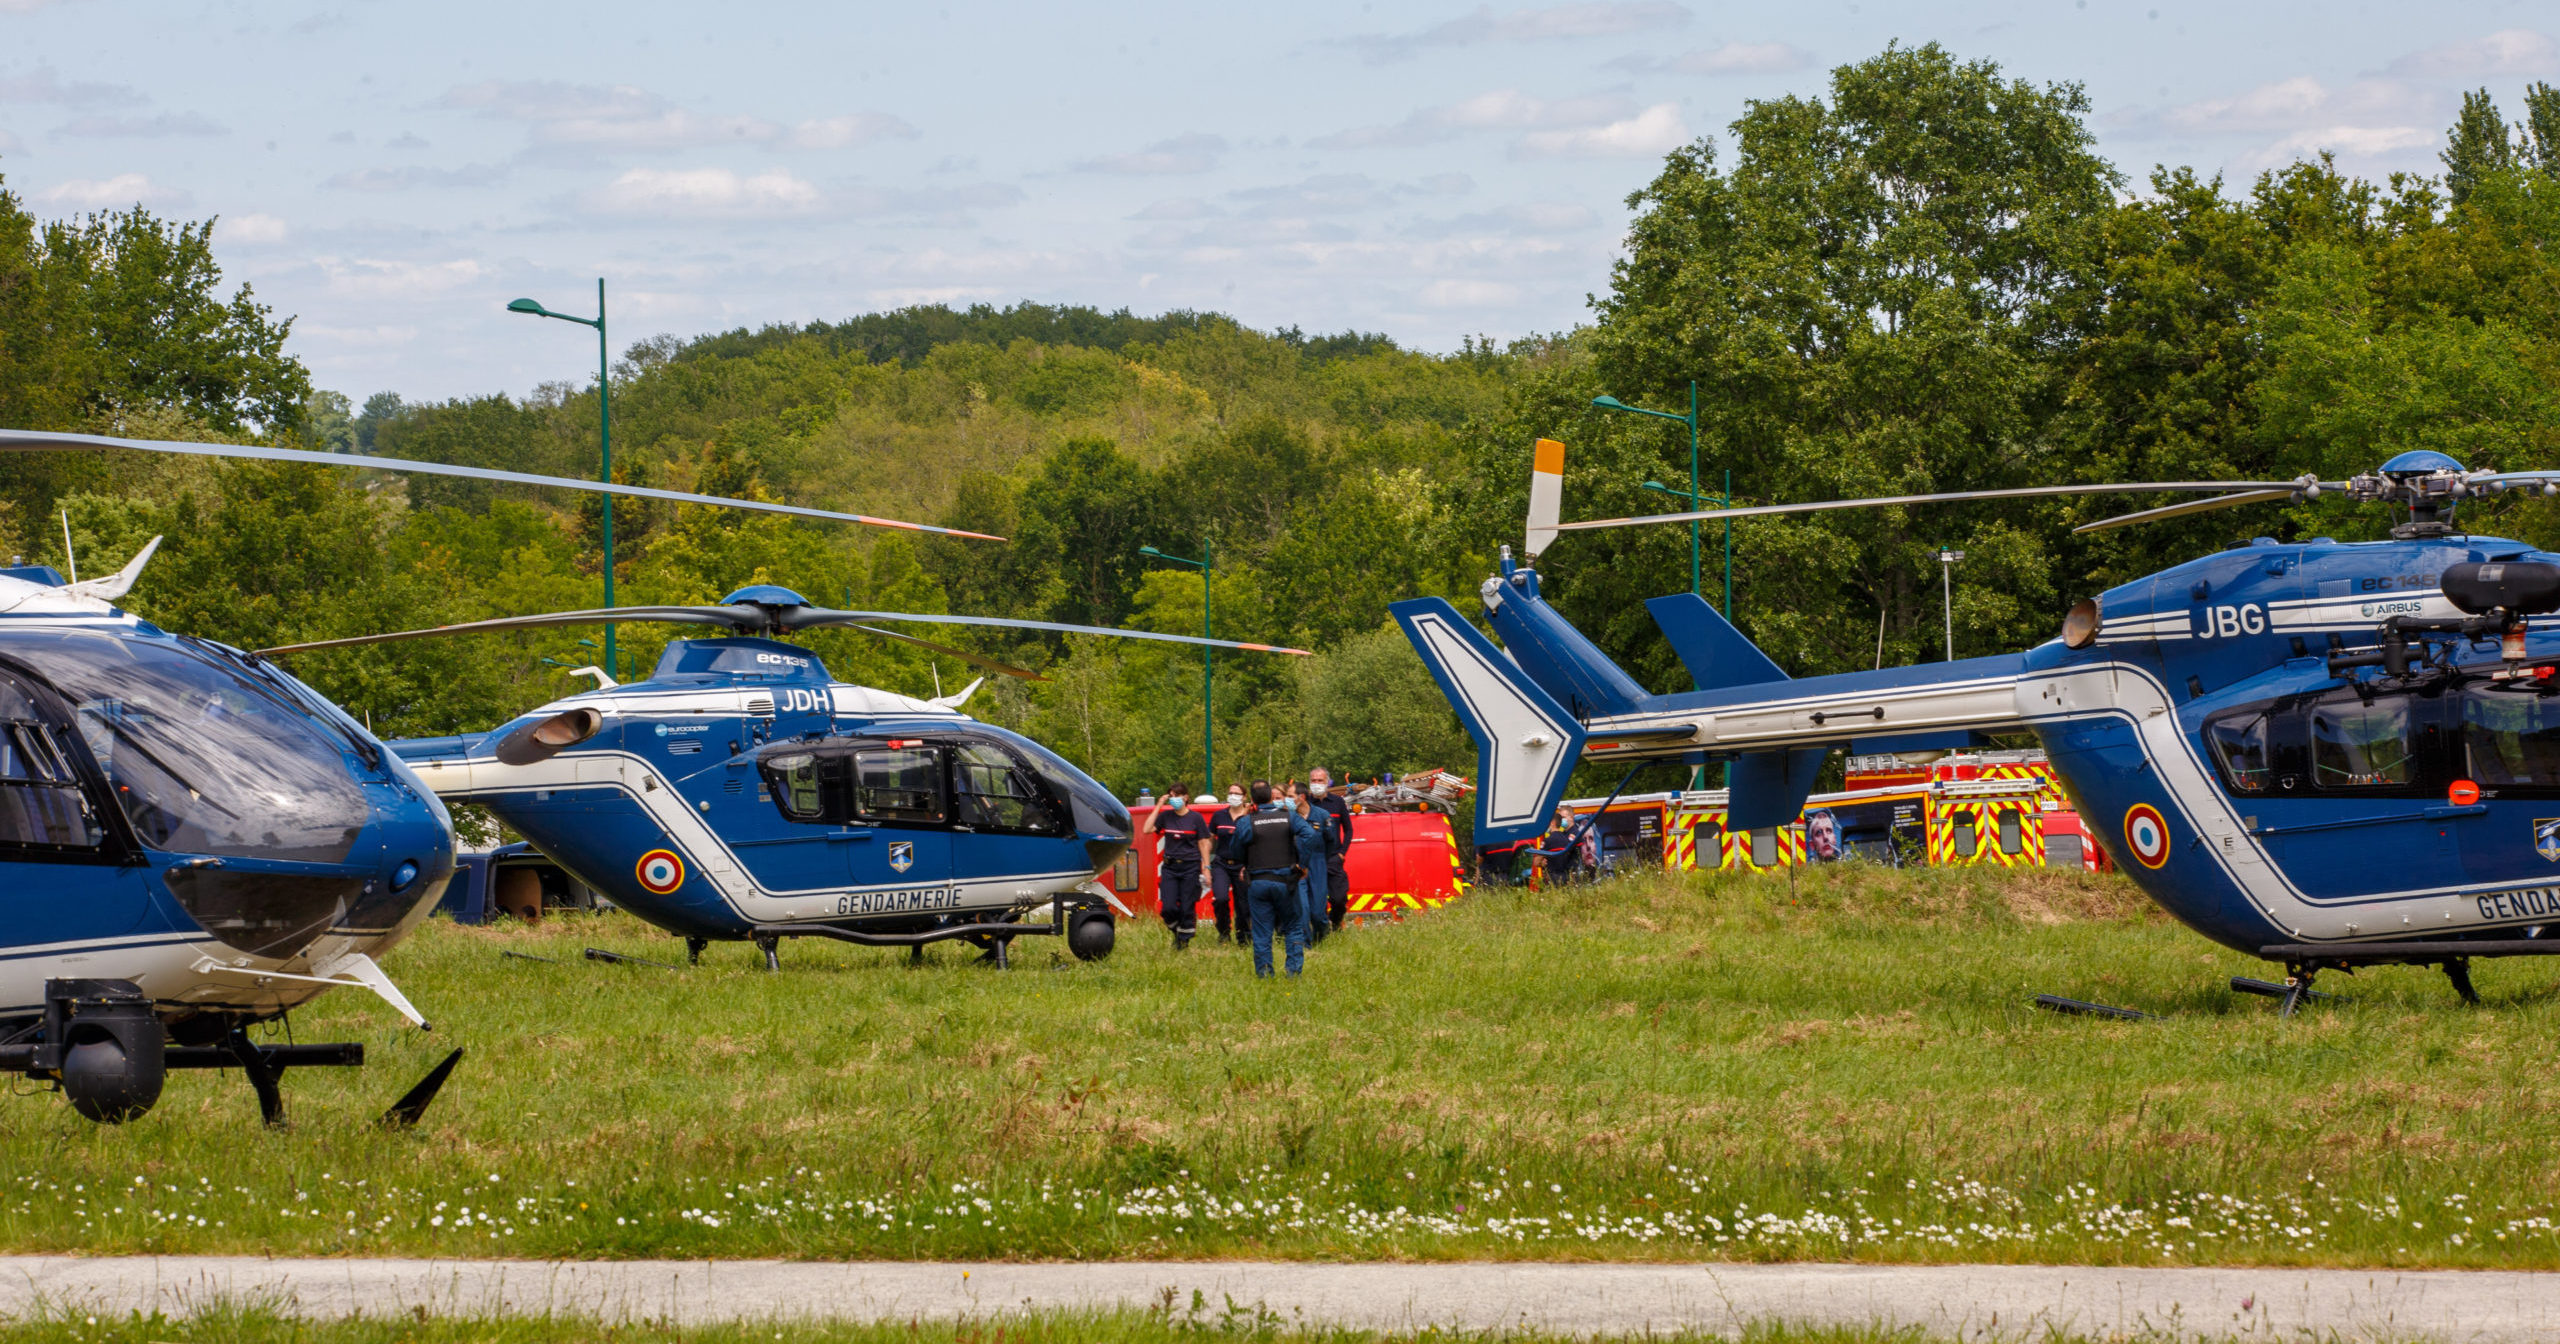 French gendarmes and firemen stand near helicopters in La Chapelle-sur-Erdre, France, on Friday.